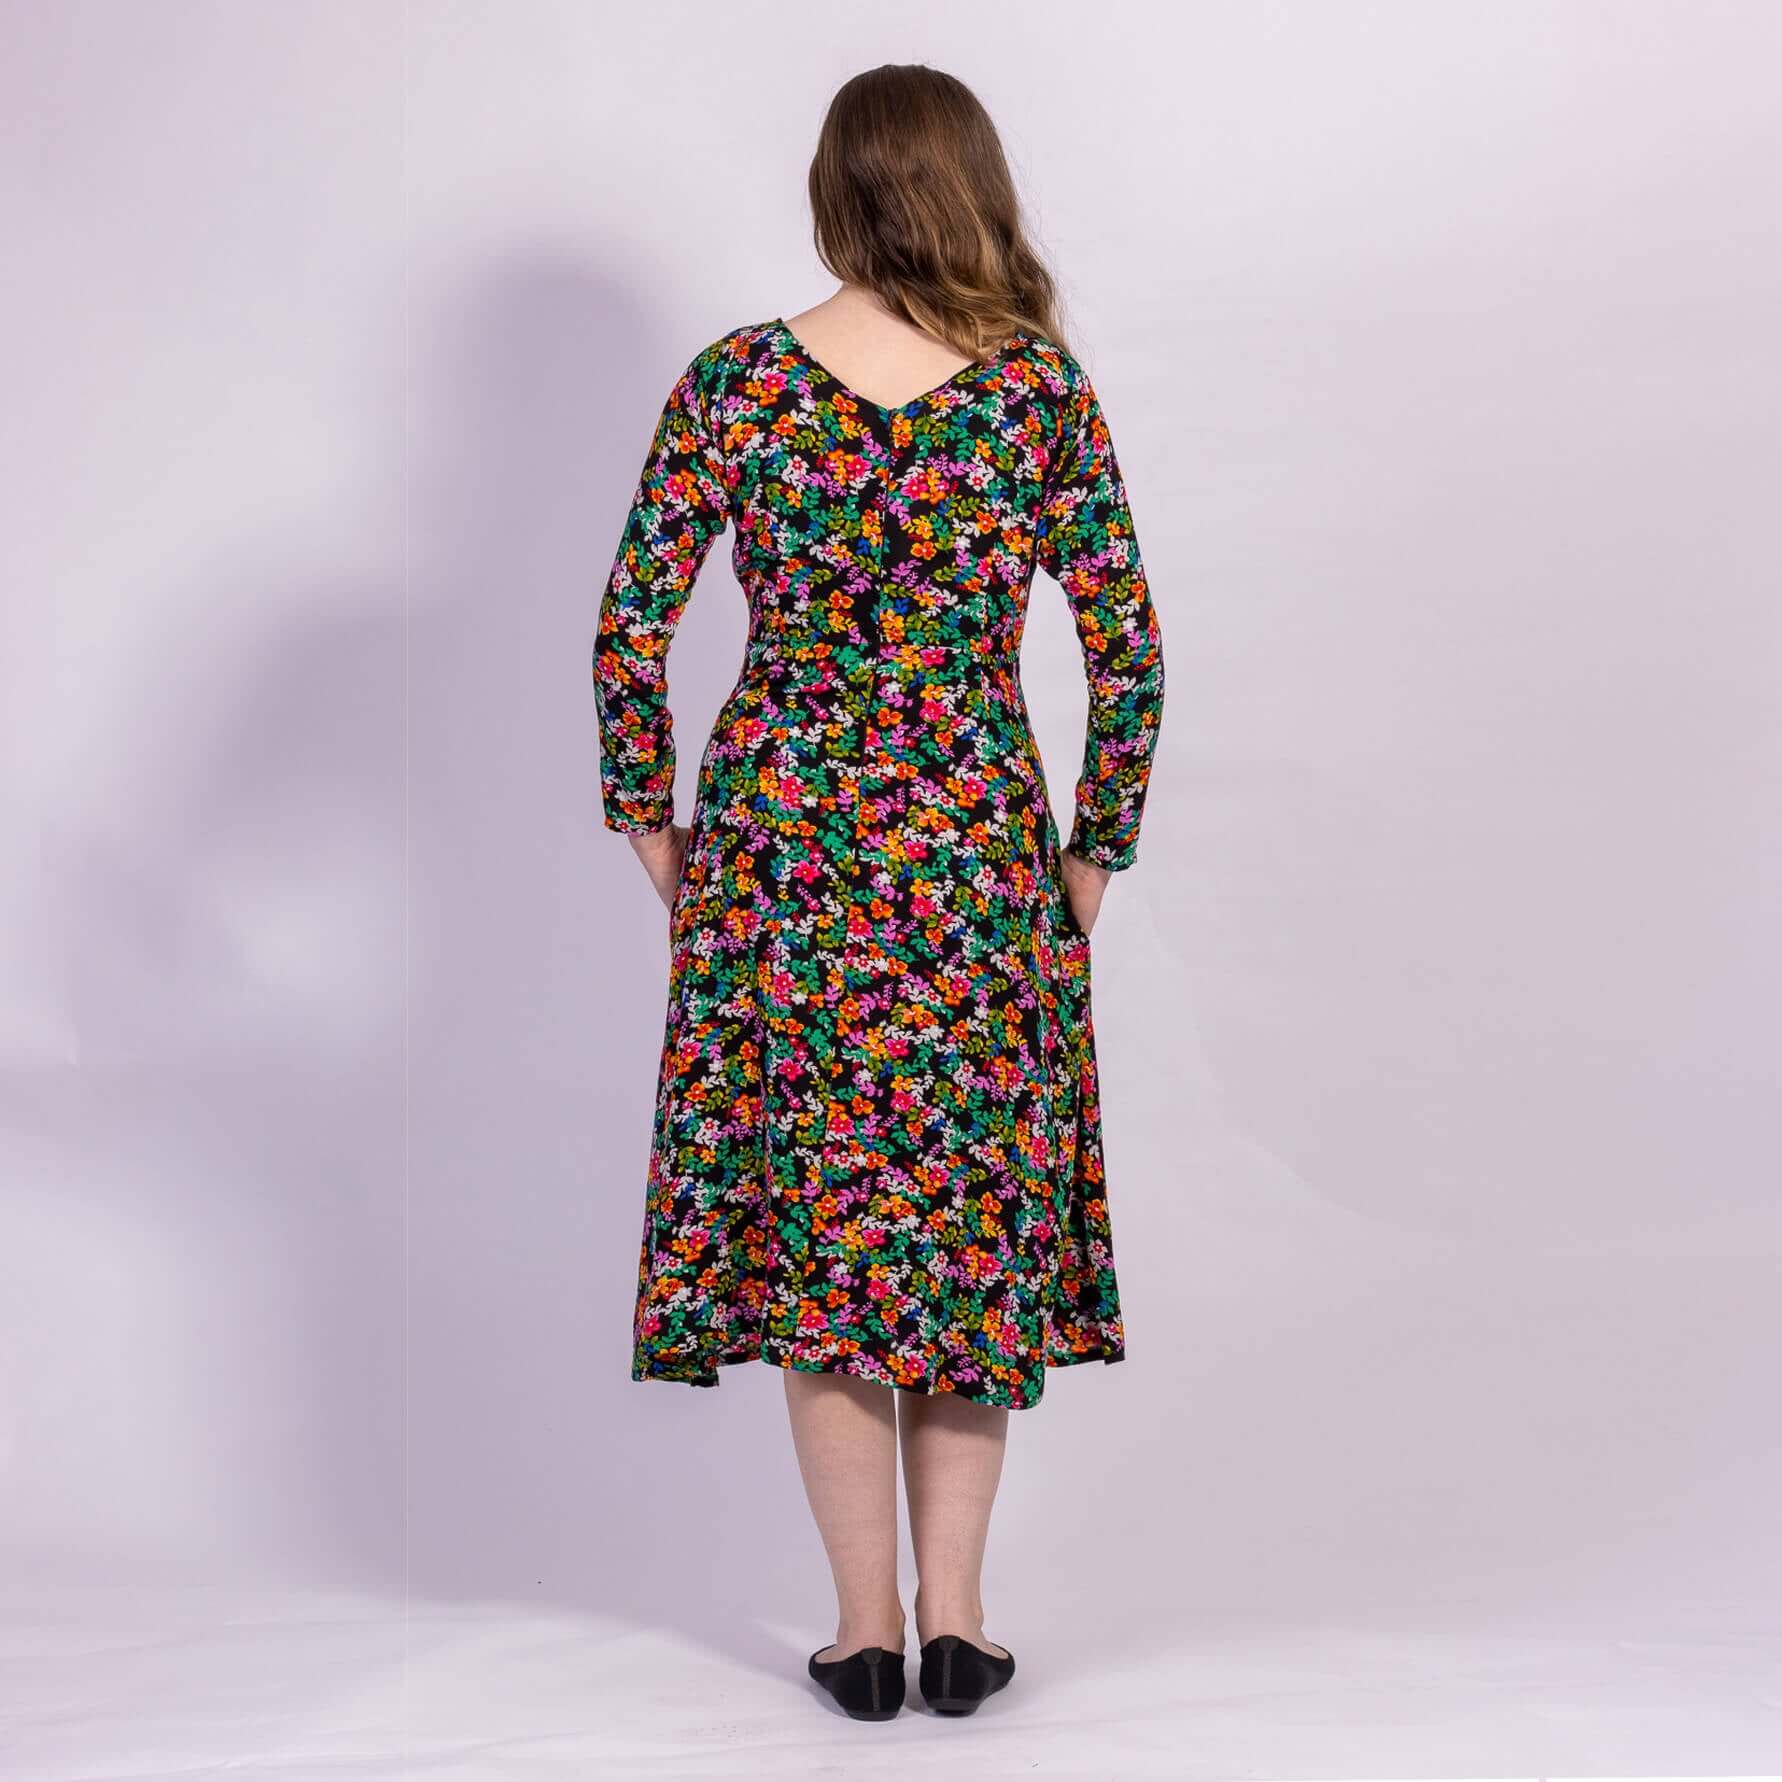 ladies floral dress with pockets